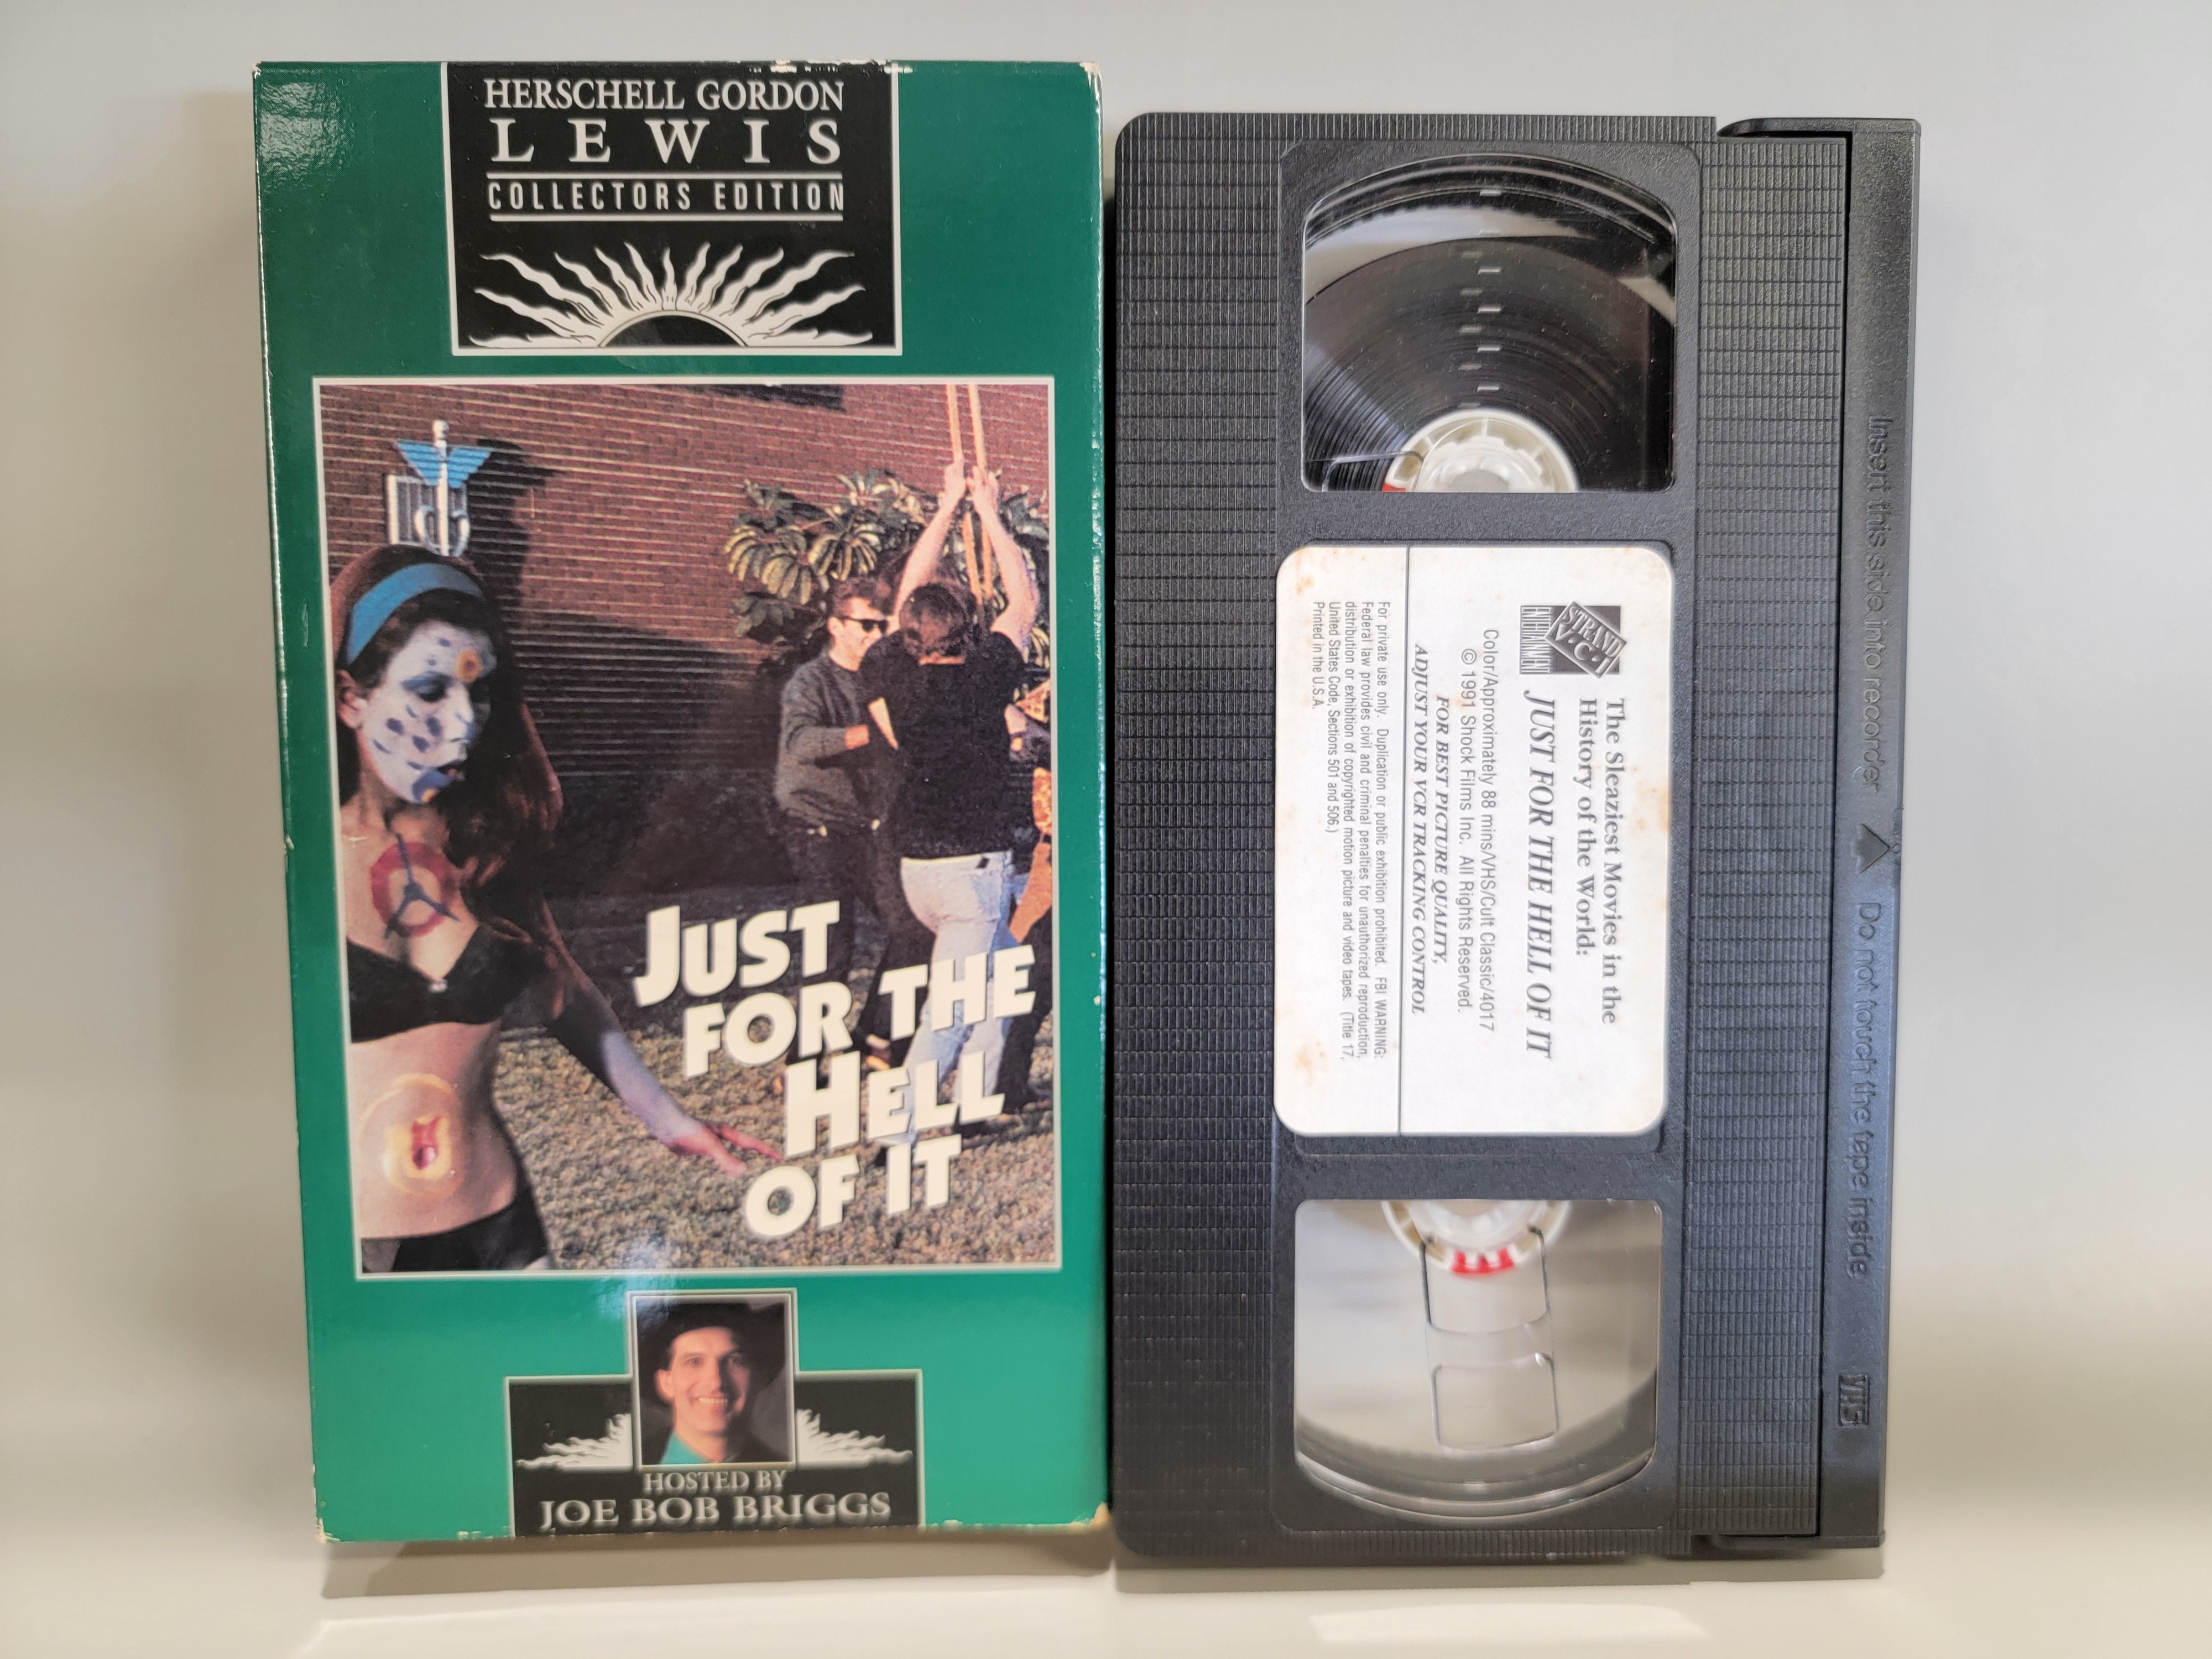 JUST FOR THE HELL OF IT VHS [USED]